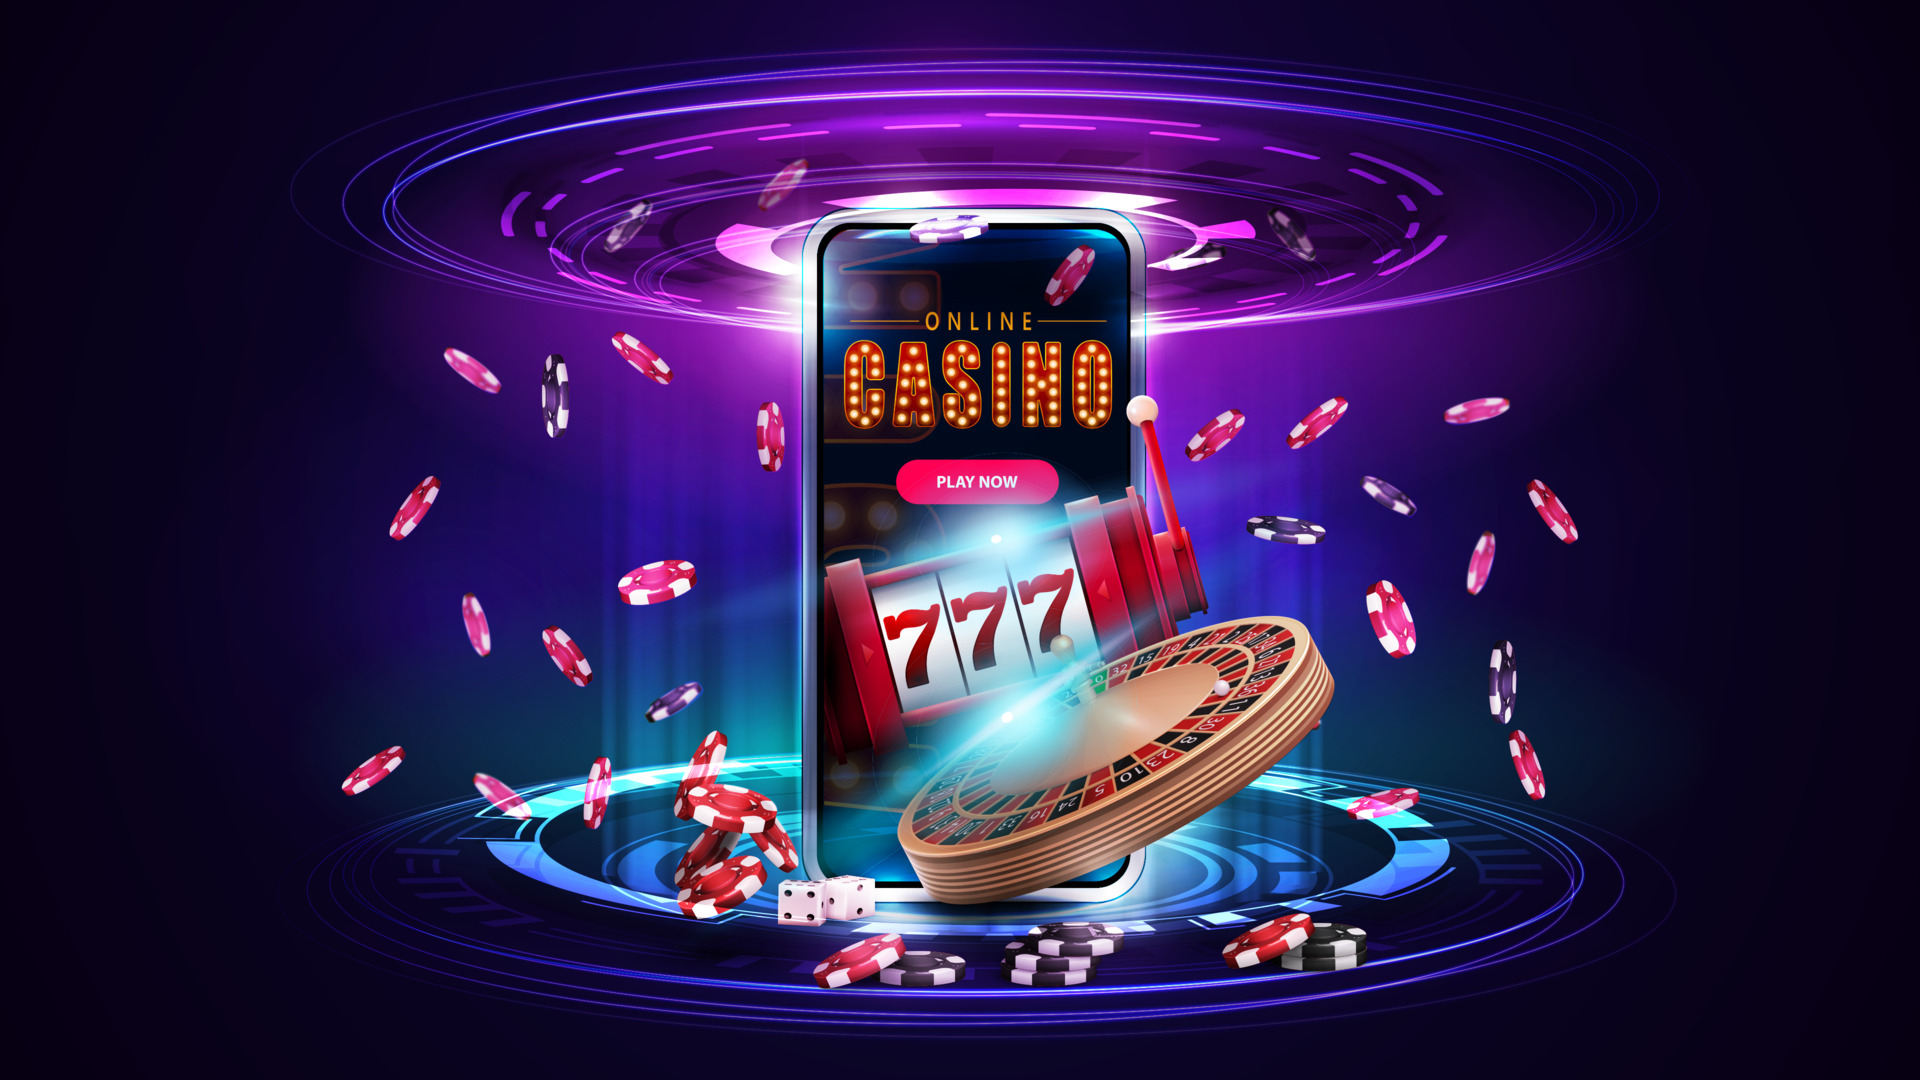 Now You Can Have The Hrvatska casino Of Your Dreams – Cheaper/Faster Than You Ever Imagined